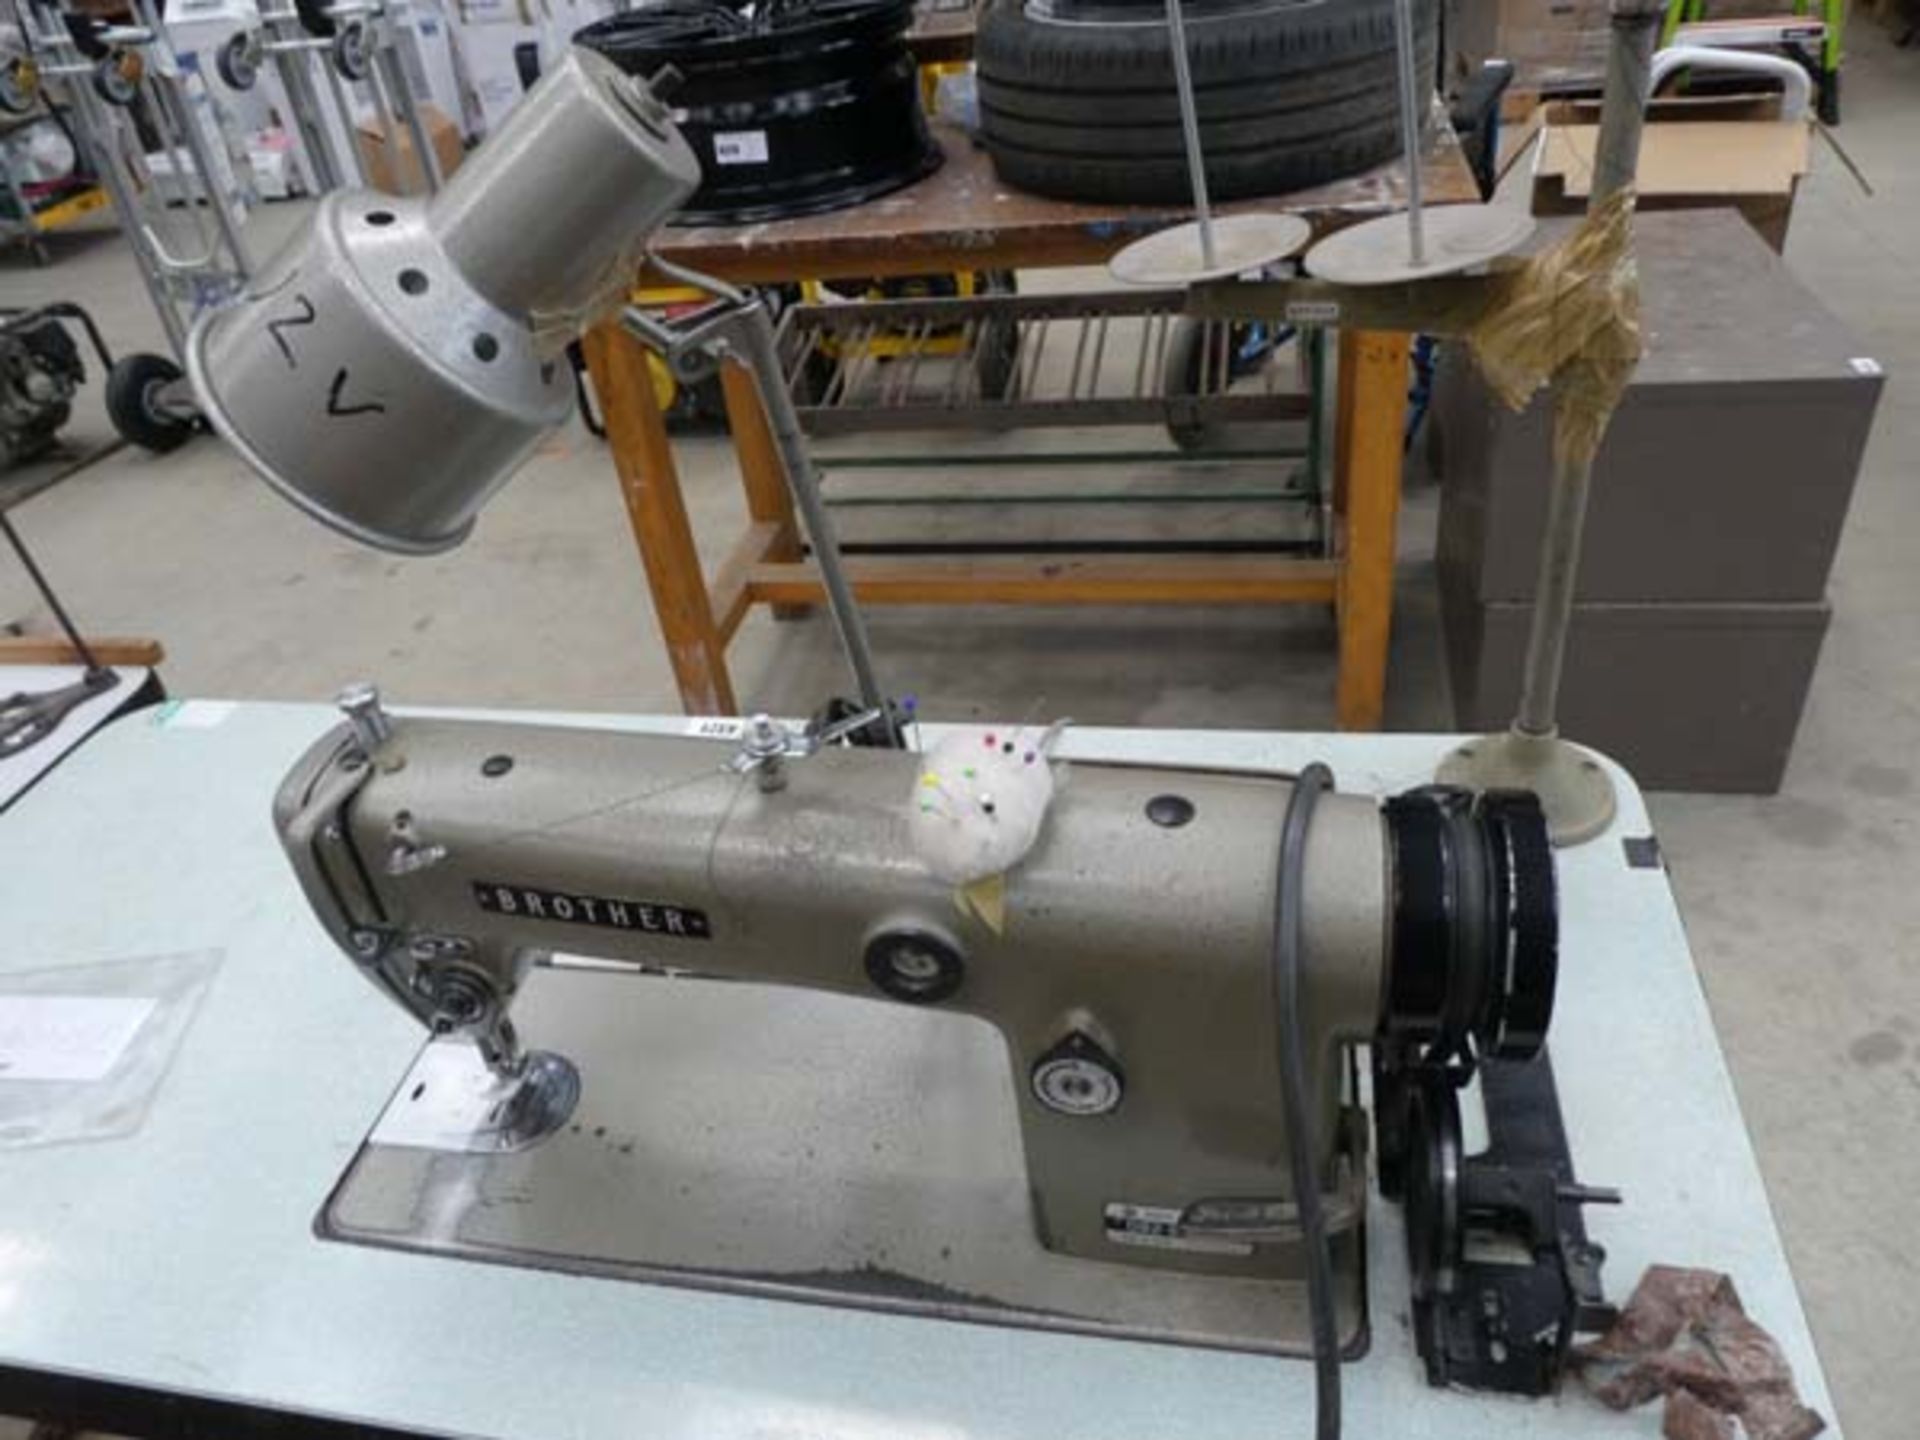 Brother industrial style sewing machine - Image 2 of 5